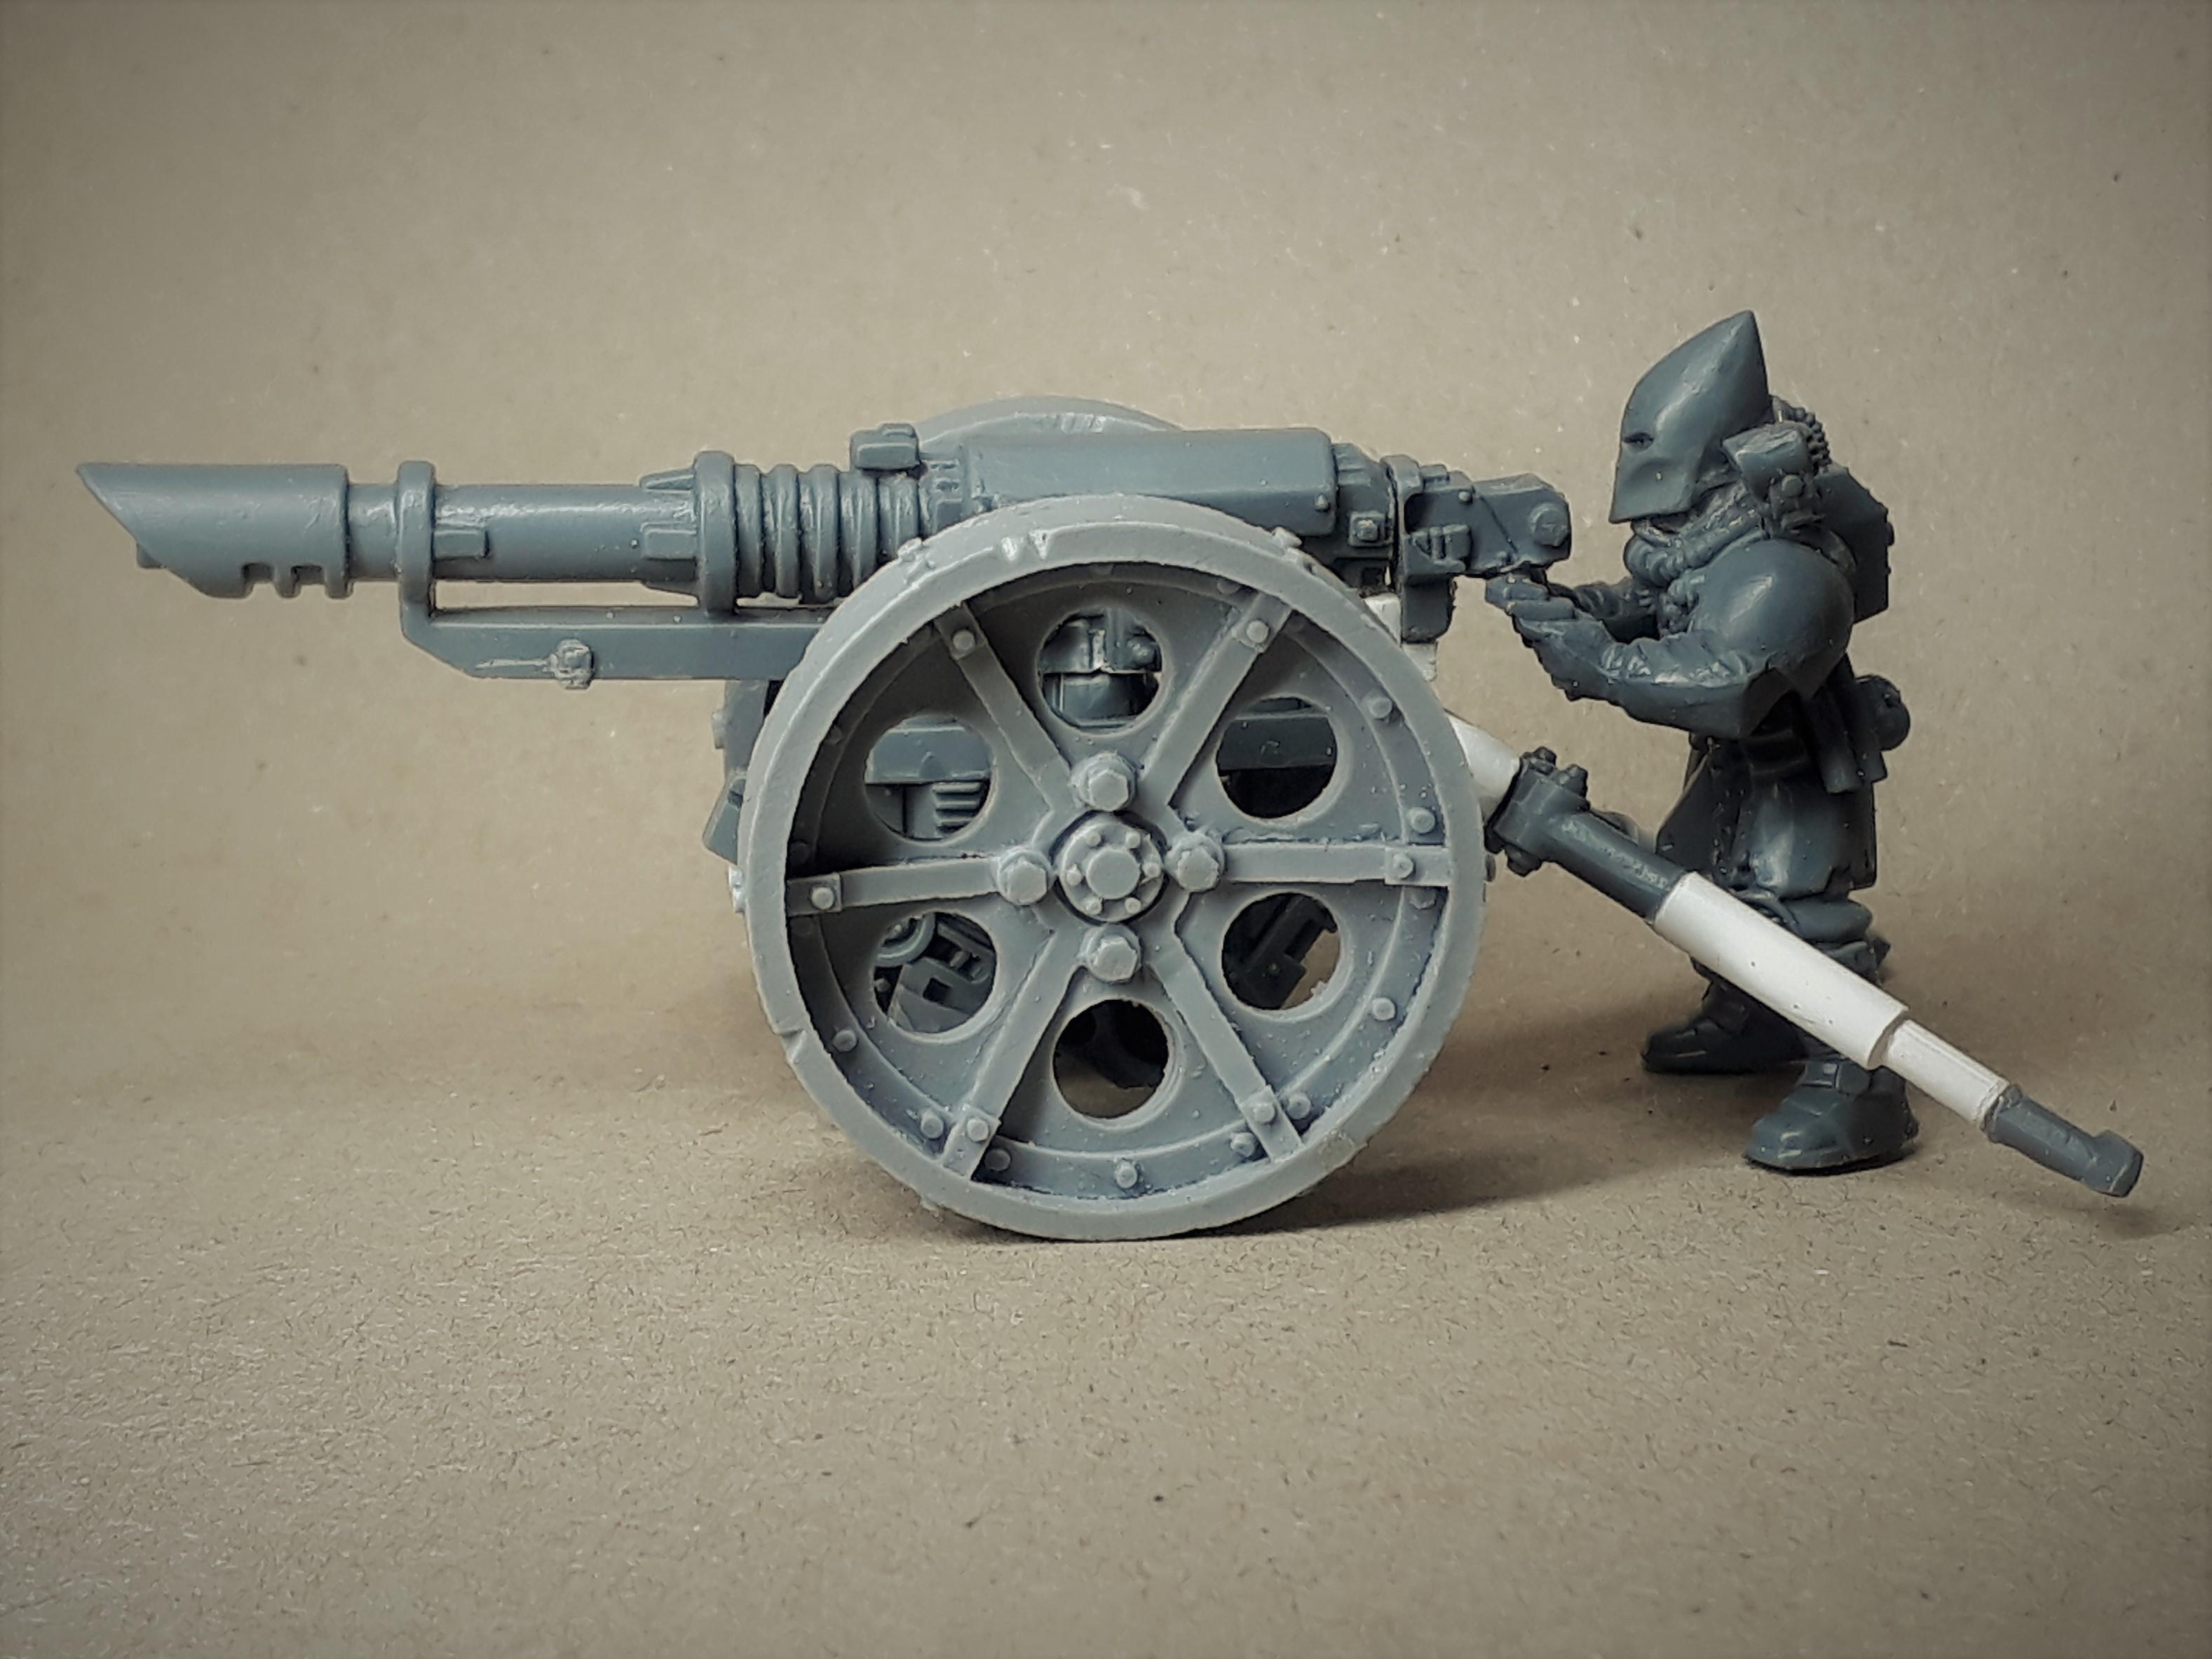 Artillery, Astra Militarum, Autocannon, Cayn'spenitents, Conversion, Heavy Weapons Team, Heavyweaponsteam, Imperial Guard, Infantry, Lascannon, Warhammer 40,000